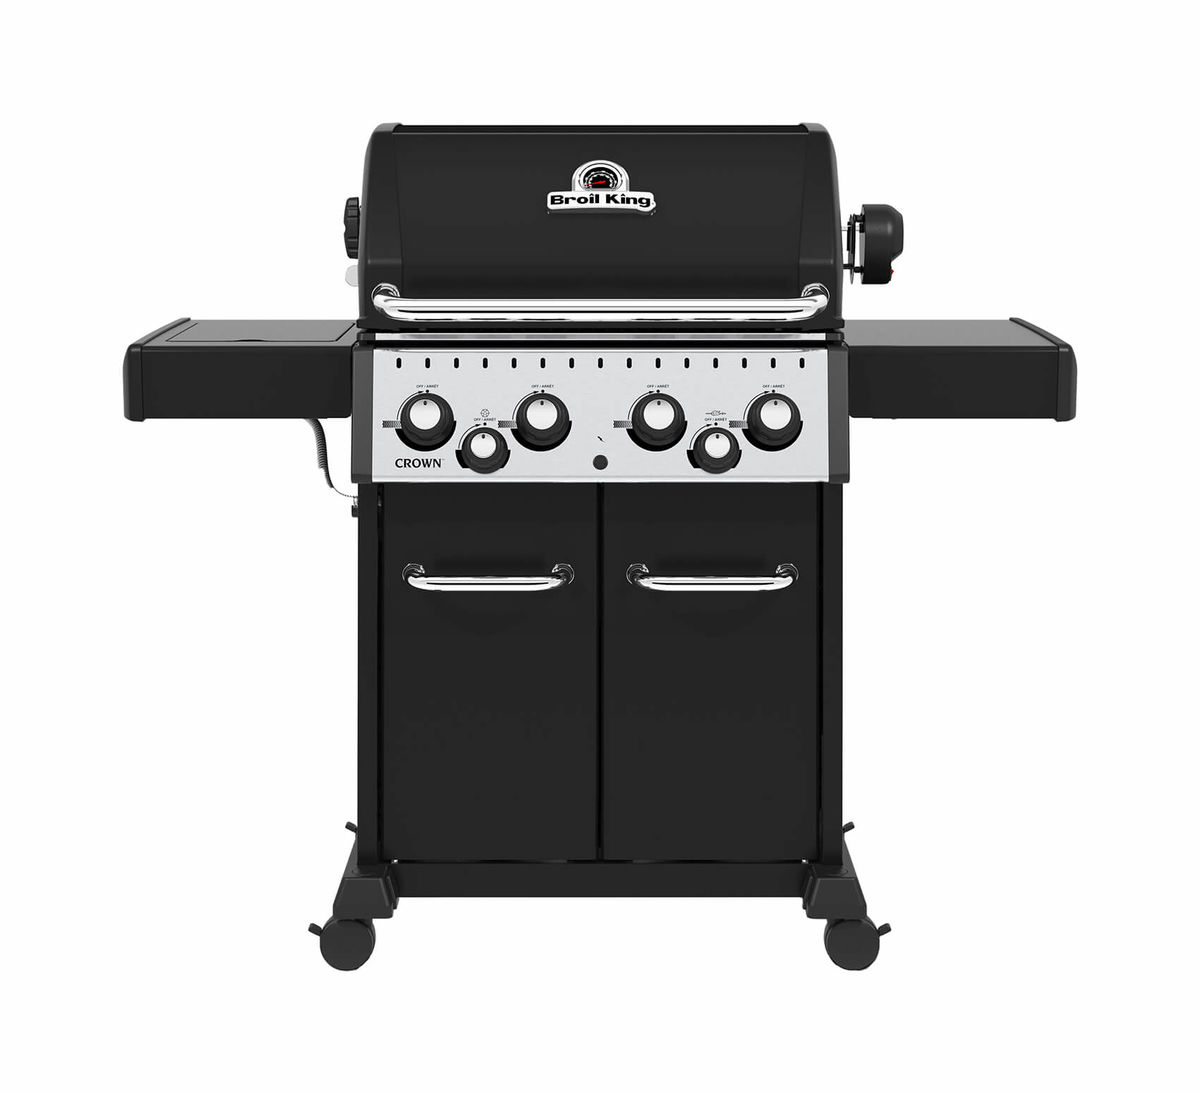 Image of Broil King Crown 490 Grill bei nettoshop.ch